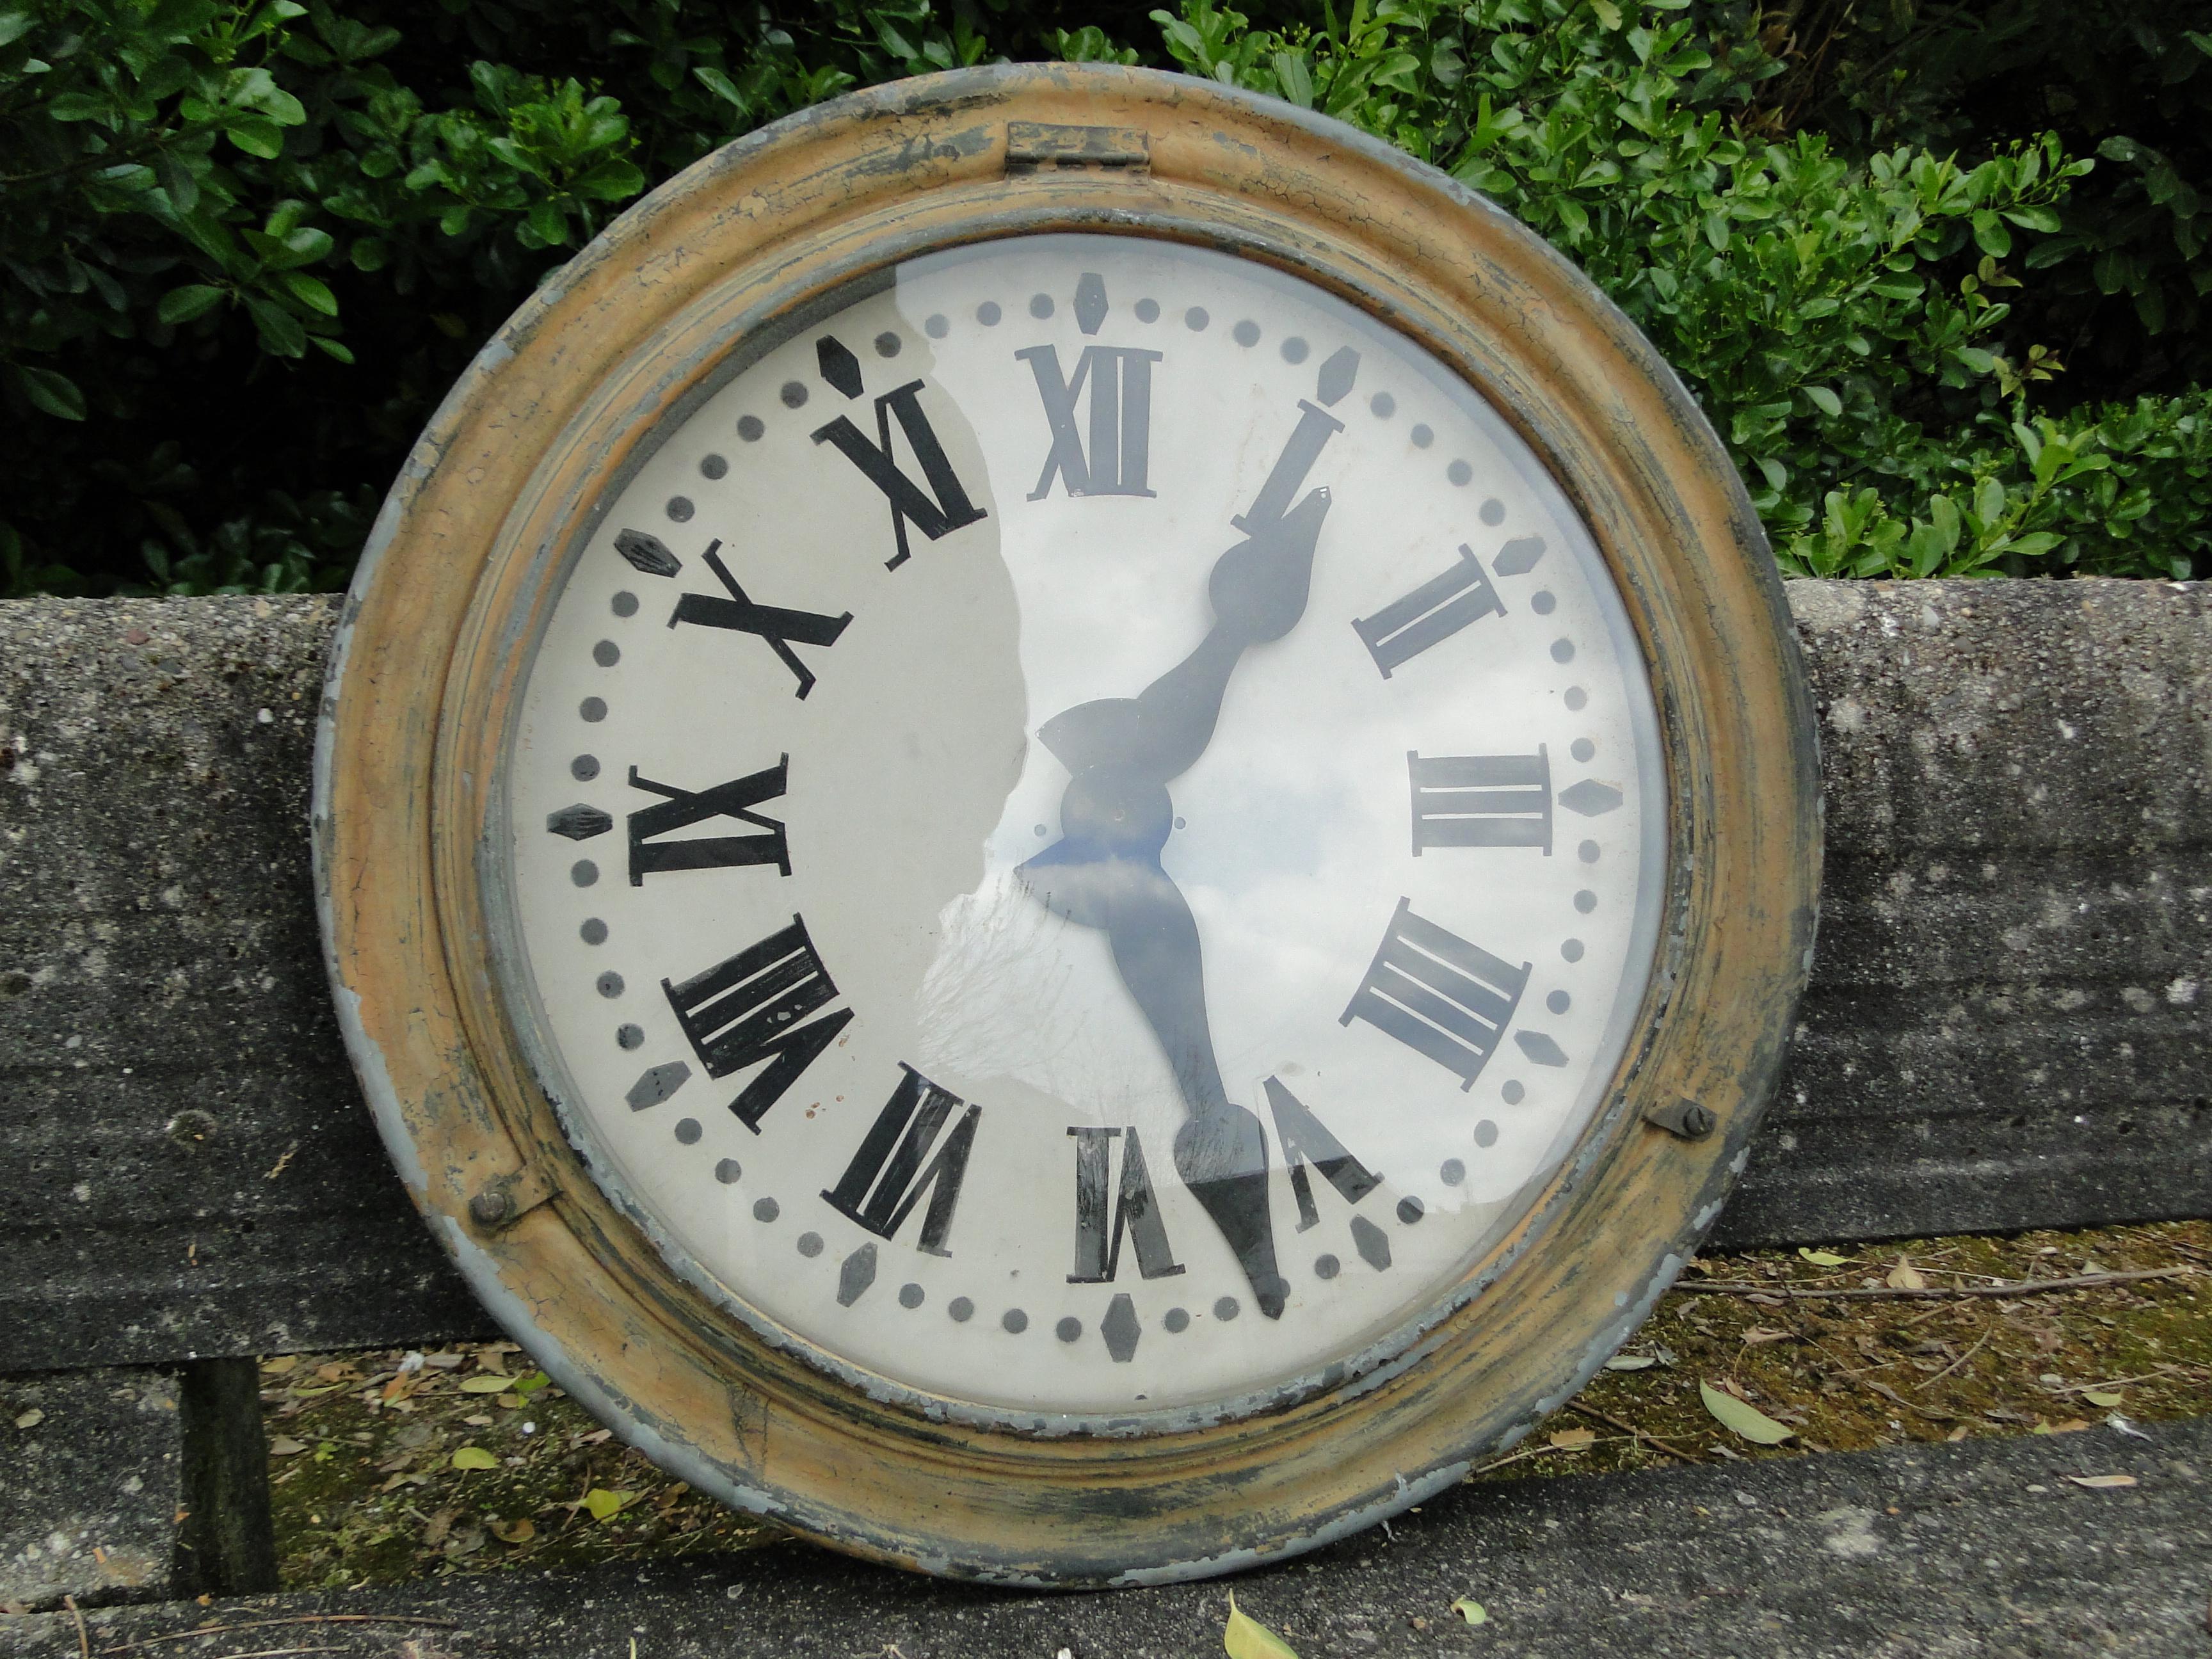 Vintage French station - Railway - Factory Brillie clock

The frame is metal with glass - The faces are painted

Measures: Diameter 26,37 inch

Original vintage conditon

Quartz movement to review
original needles

It was in 1898 that